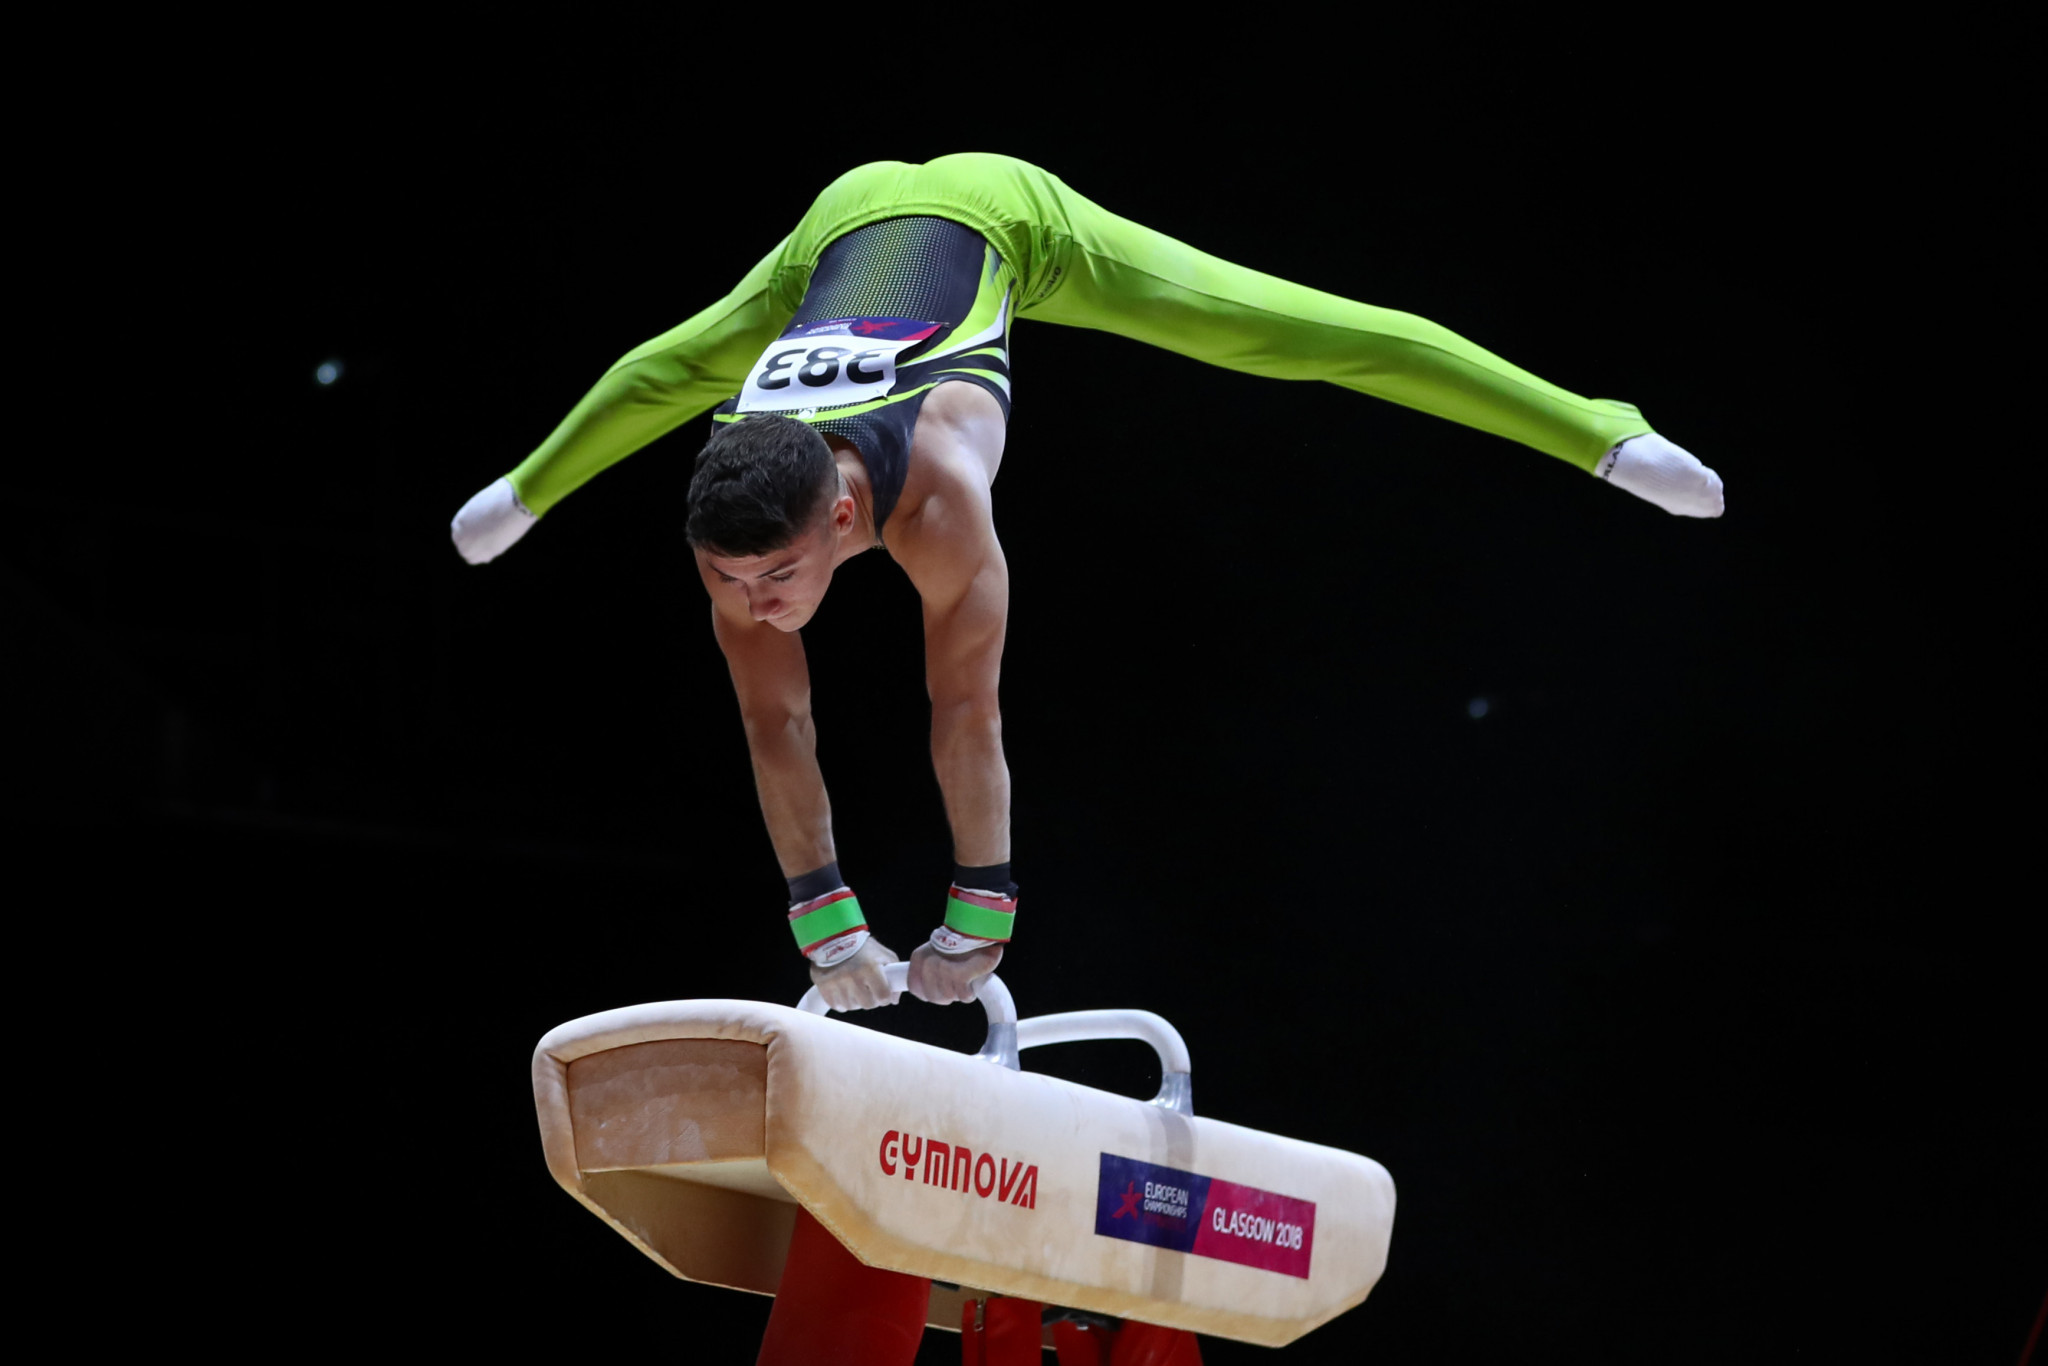 McClenaghan dominates en route to pommel horse gold at FIG World Challenge Cup